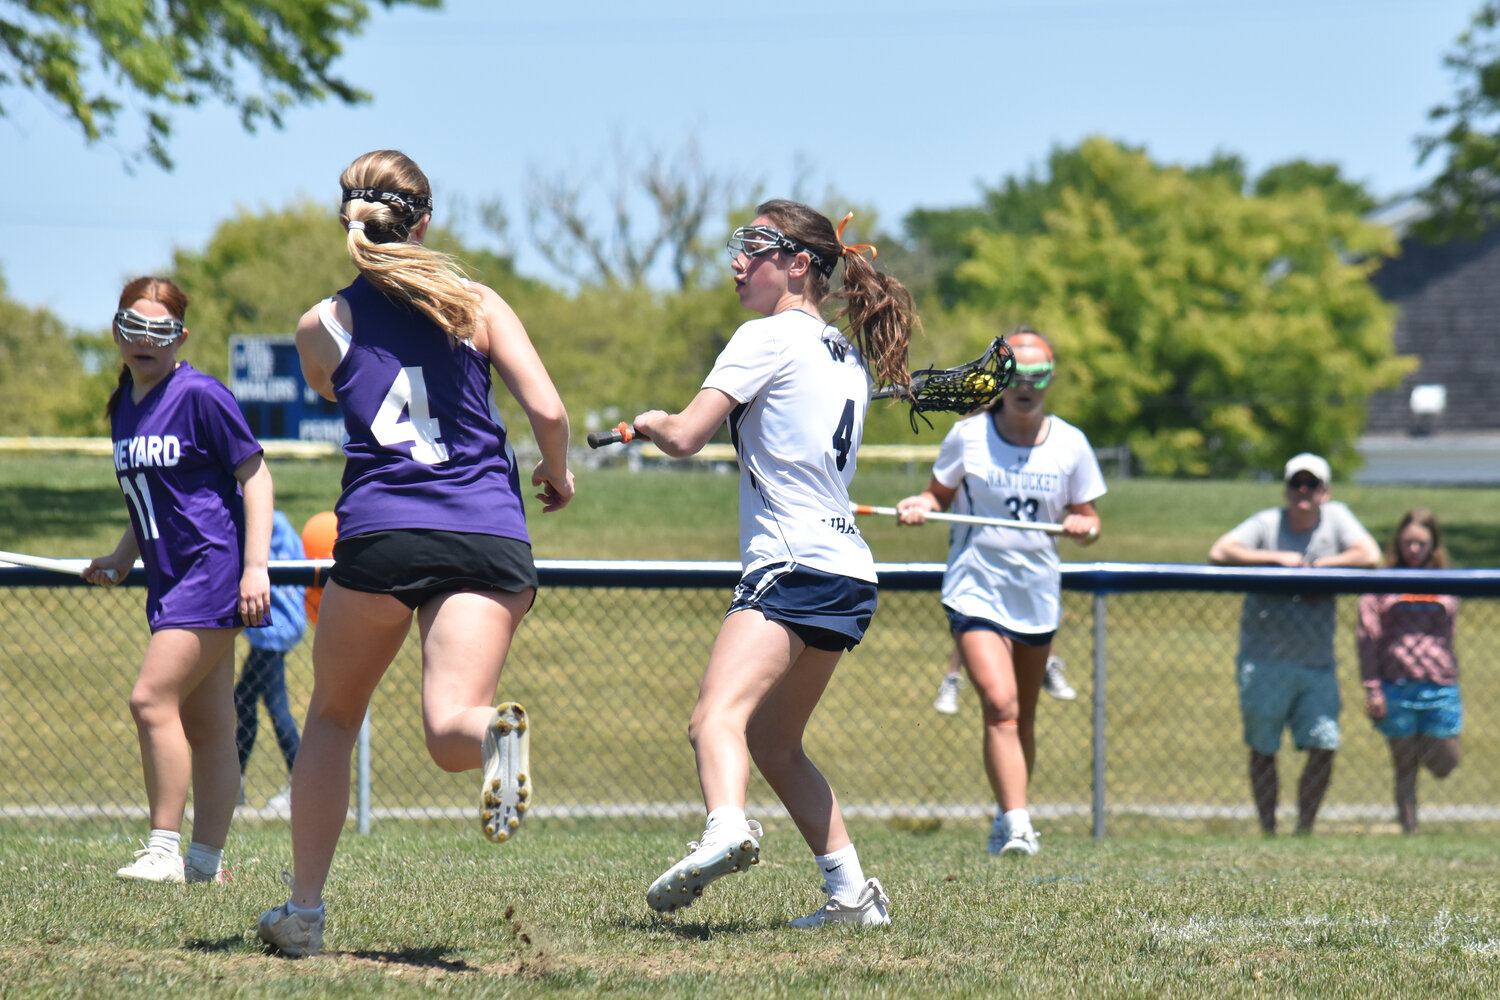 Carley Ray looks for a shot during the girls lacrosse team's 17-2 win Saturday over Martha's Vineyard.